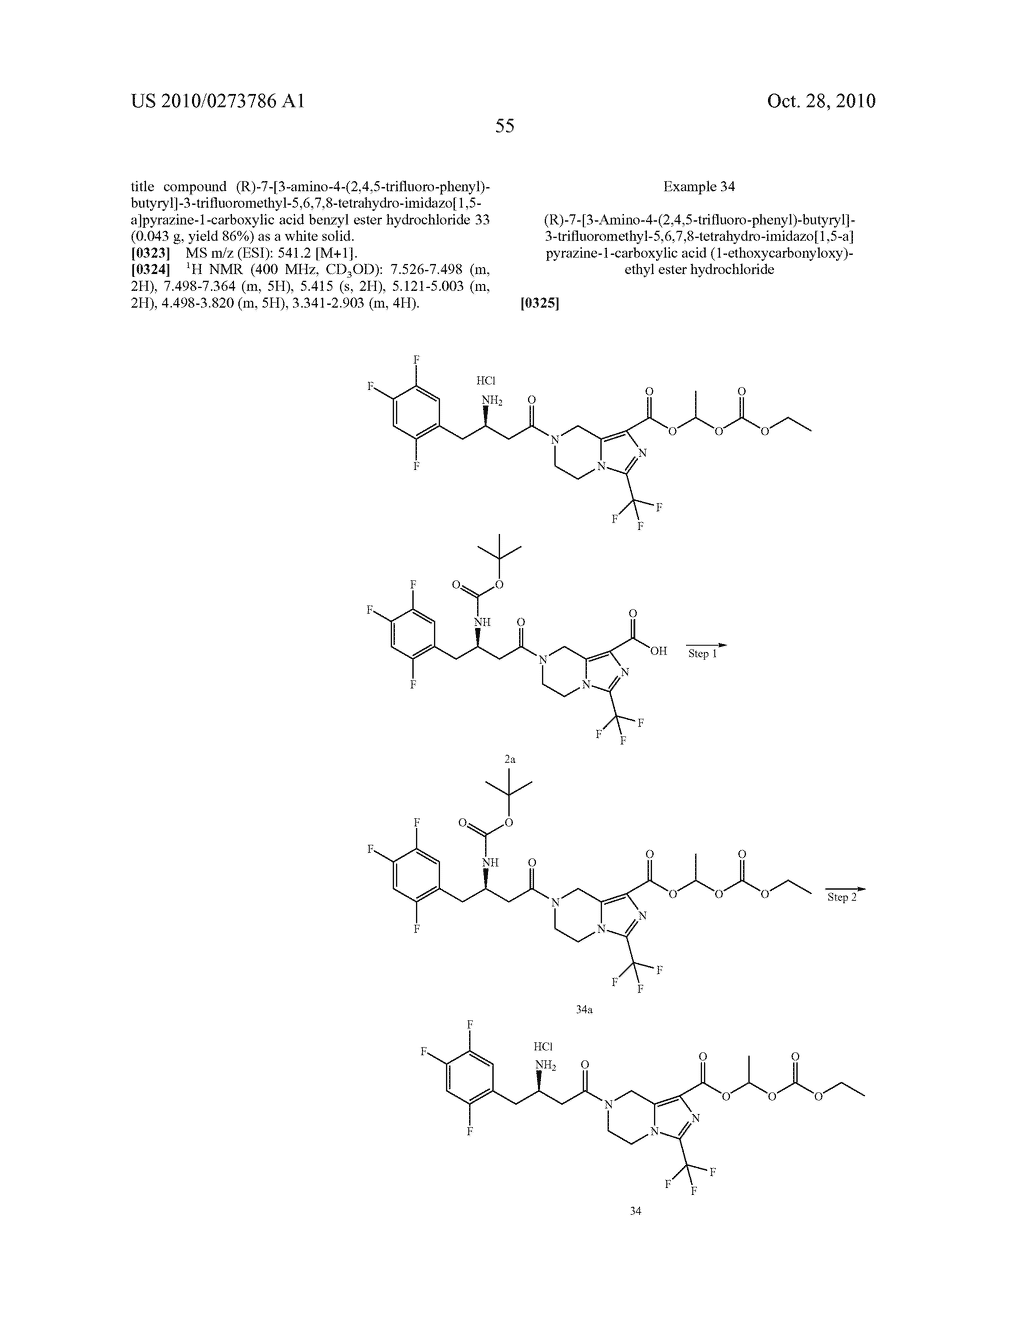 TETRAHYDRO-IMIDAZ0[1,5-A]PYRAZINE DERIVATIVES, PREPARATION PROCESS AND MEDICINAL USE THEREOF - diagram, schematic, and image 56